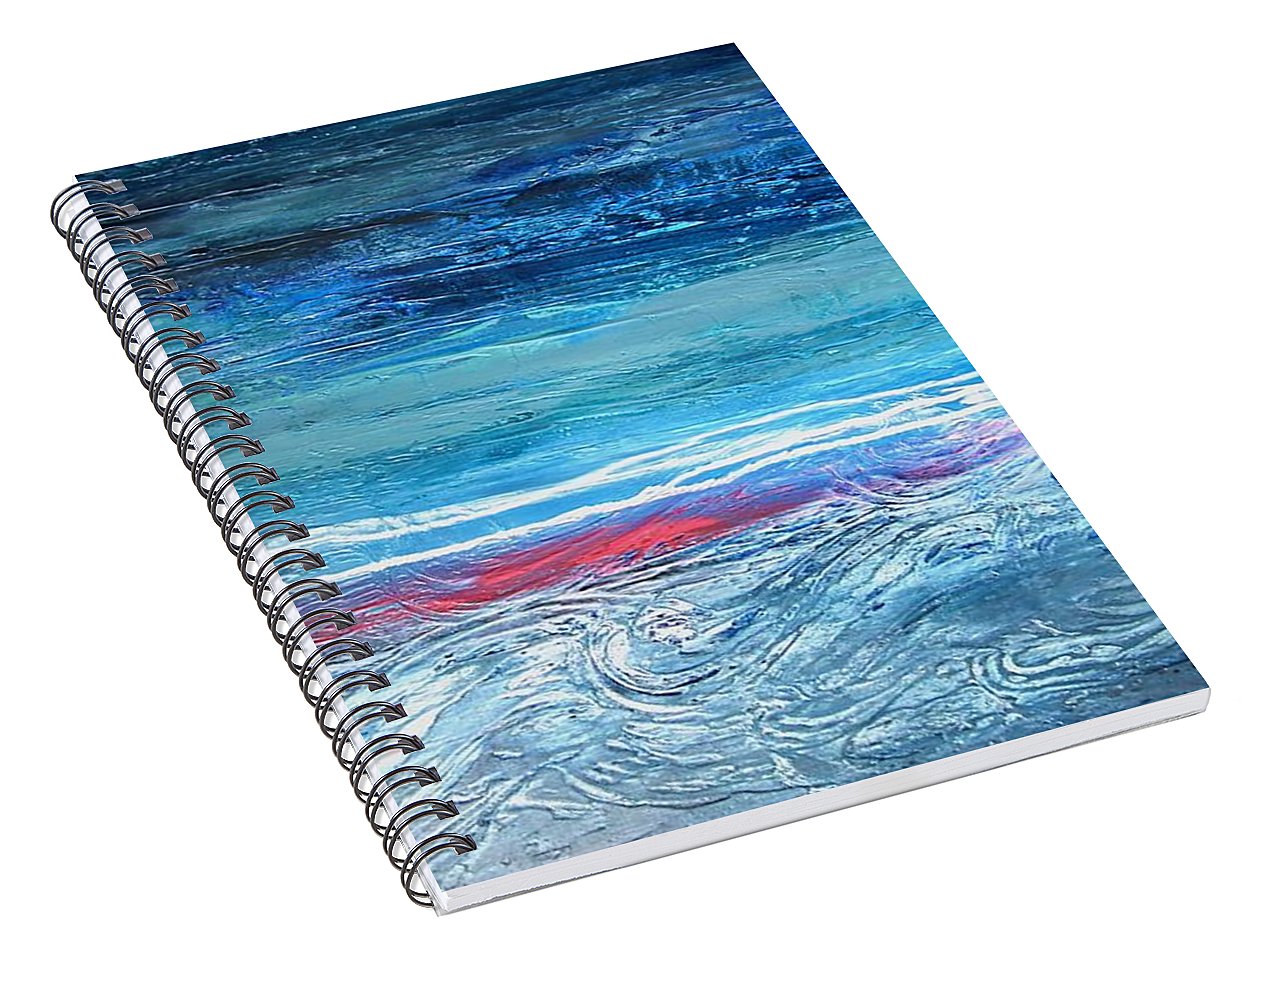 Magnificent Morning Abstract Seascape - Spiral Notebook